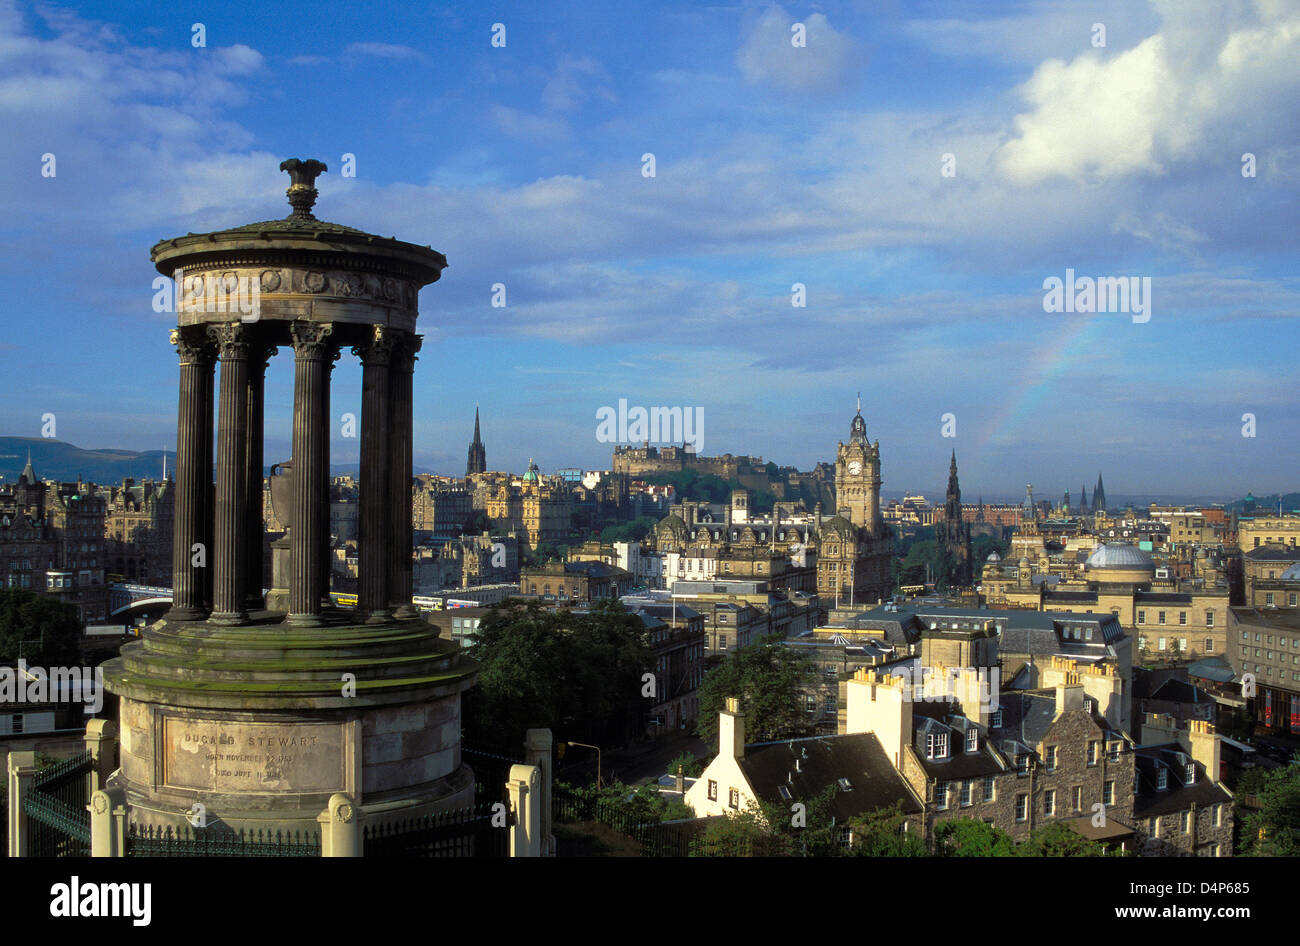 dugald stewart monument on calton hill with view of city Stock Photo